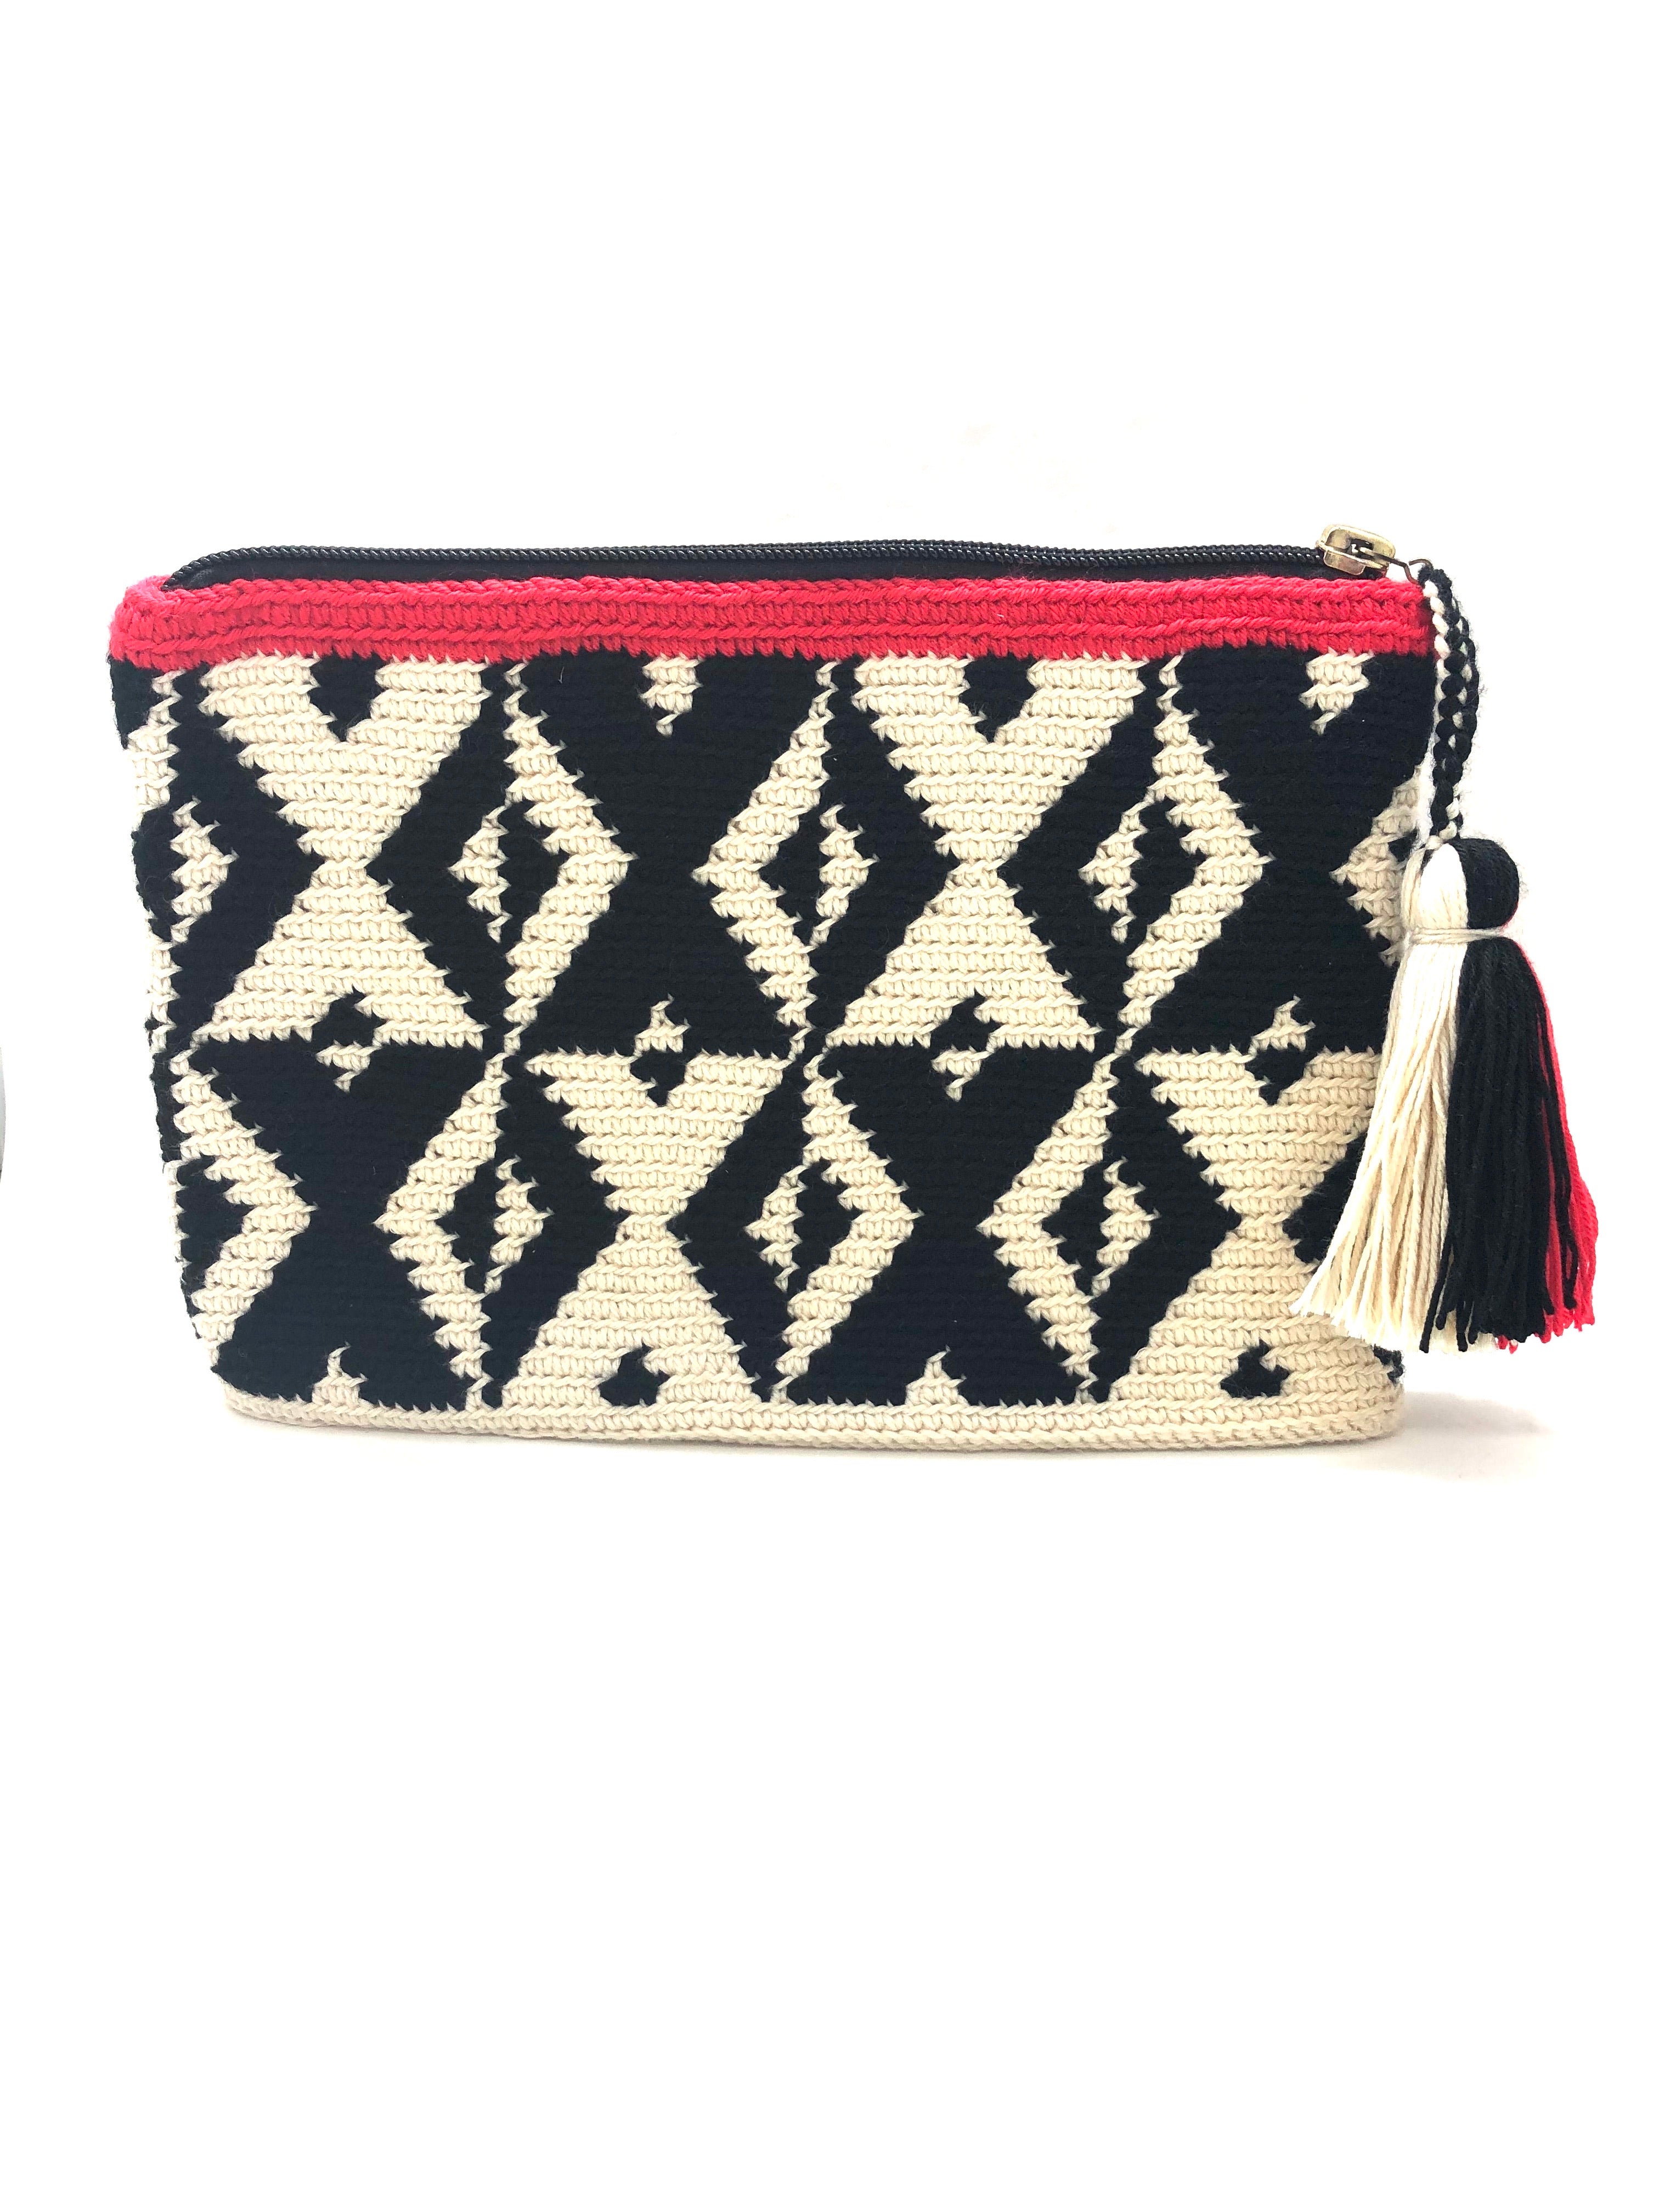 X pattern clutch, black and cream with red trim and tassel.